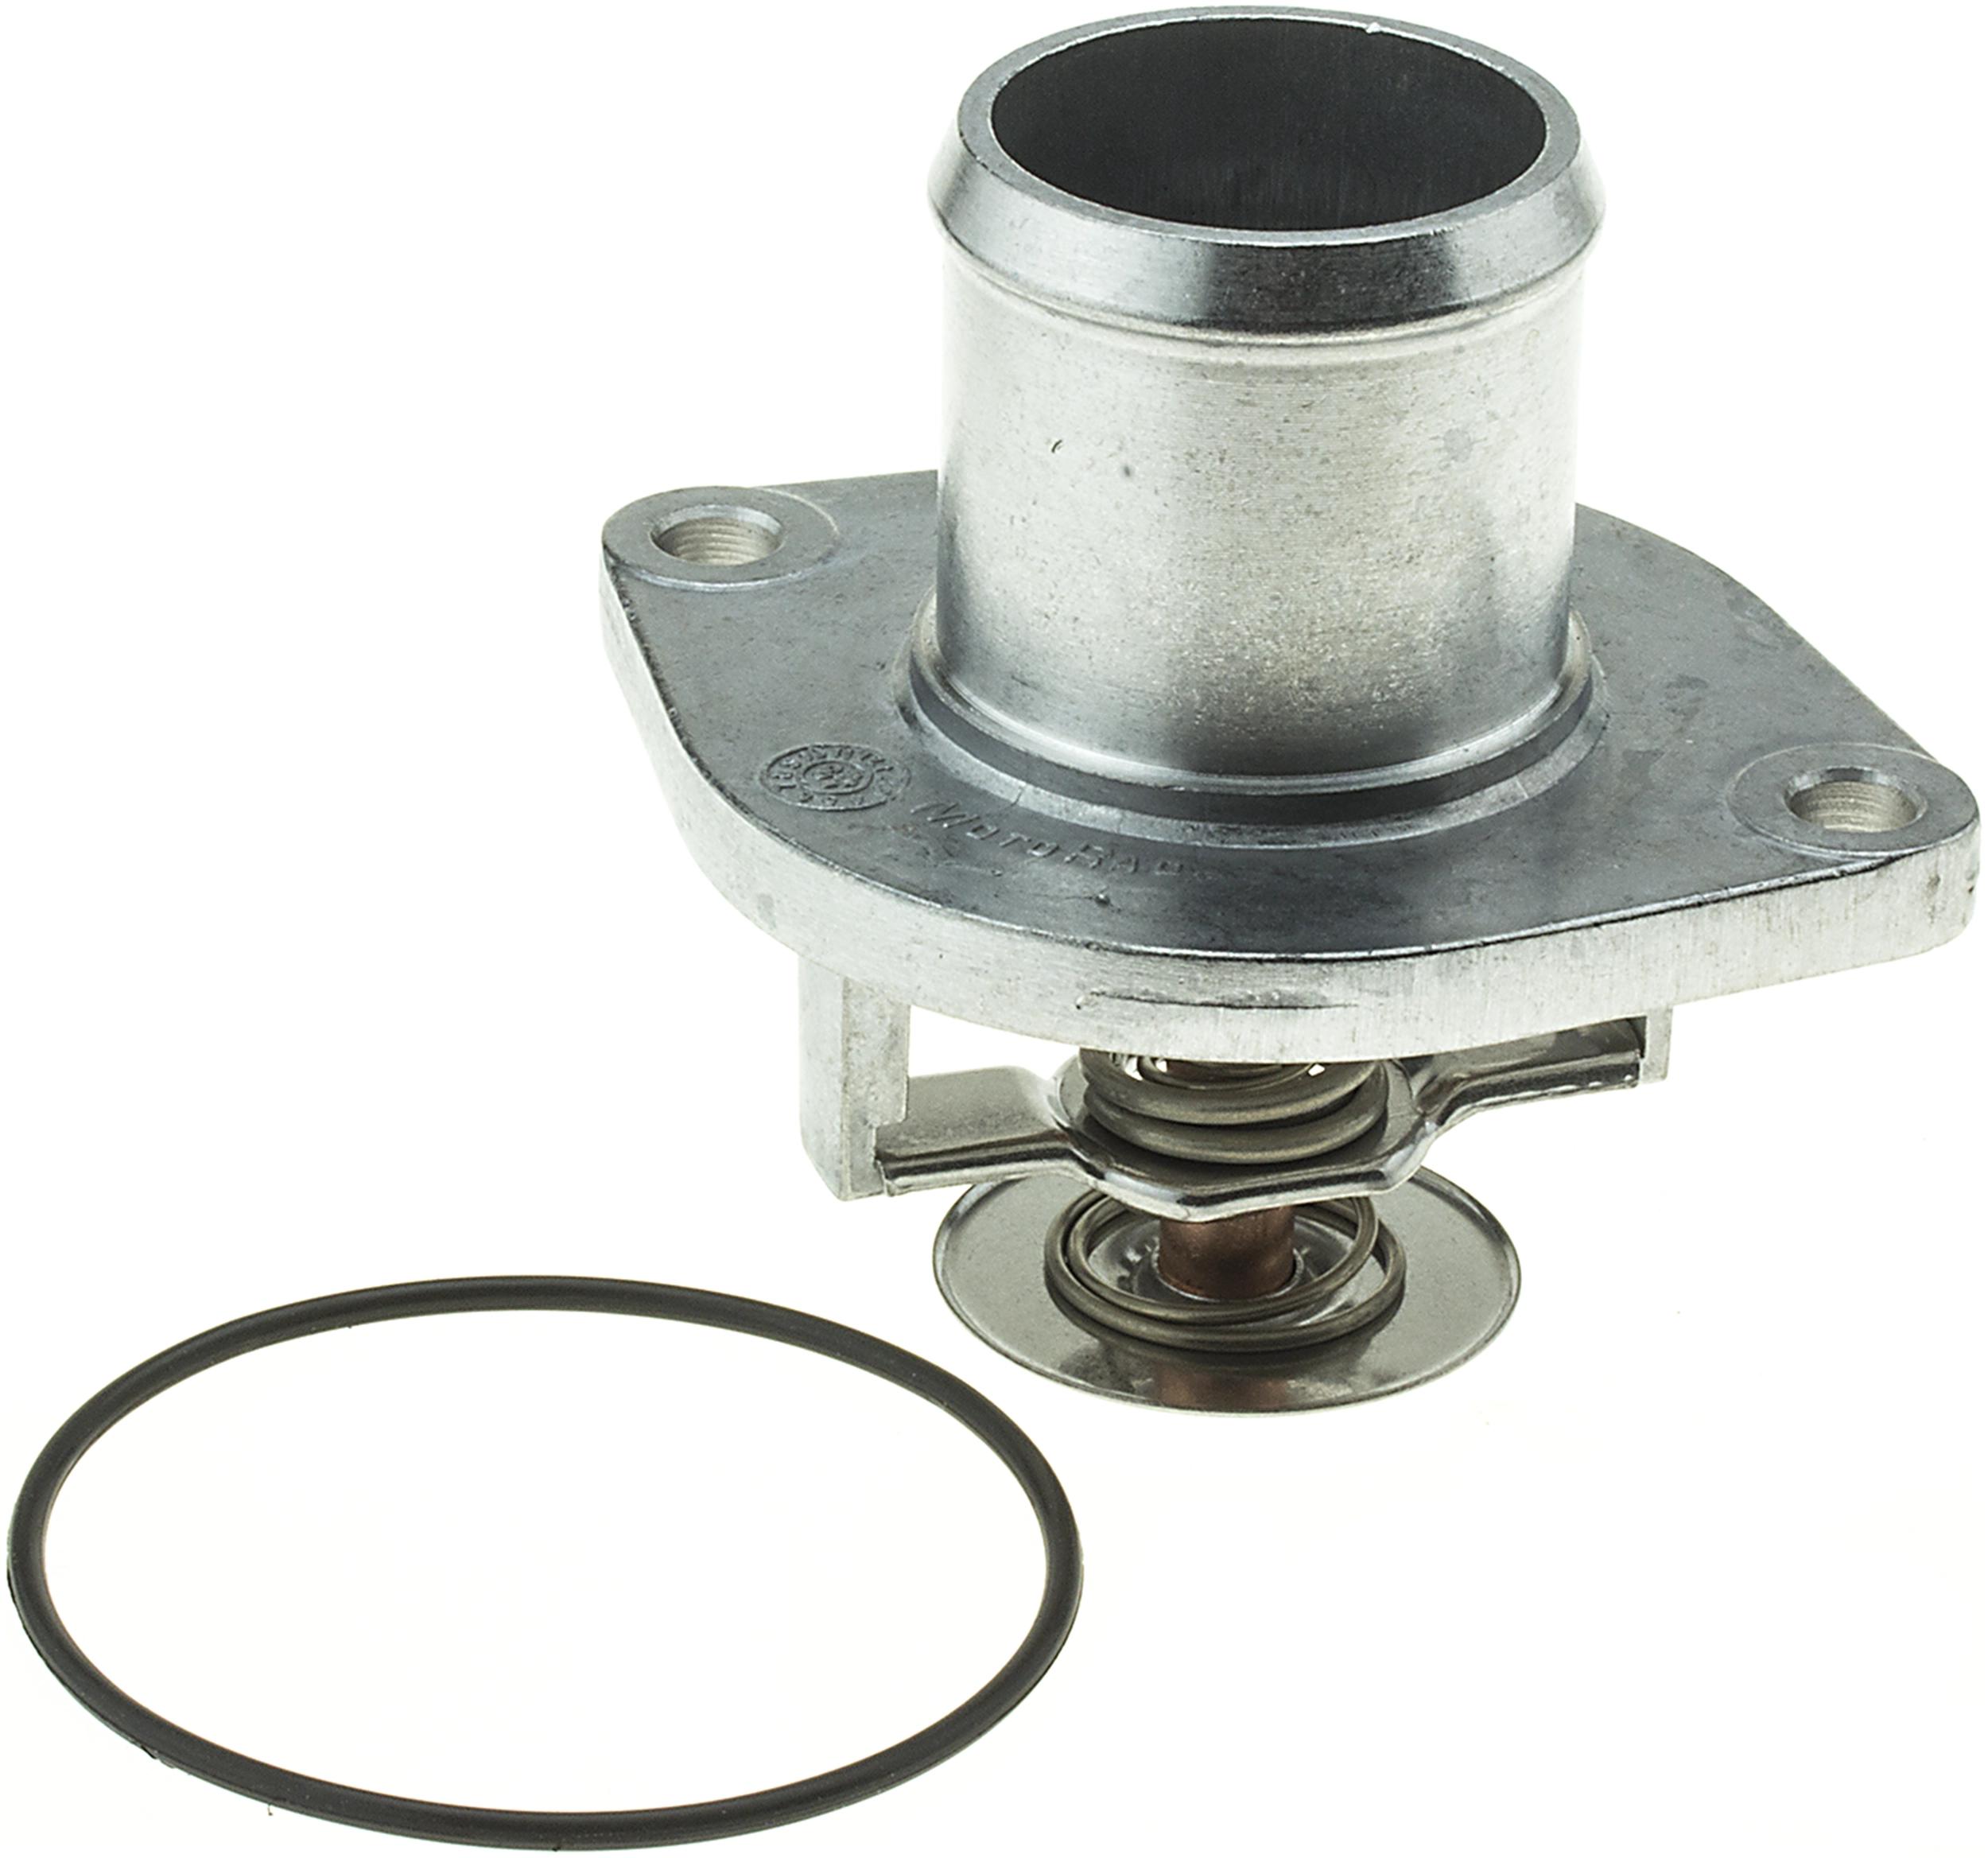 Gates 33958 Integrated Thermostat Housings 33958 INTEGRATED THERMOSTAT HOUSING false false 1.476 1.751 false 2 1 1 0.48